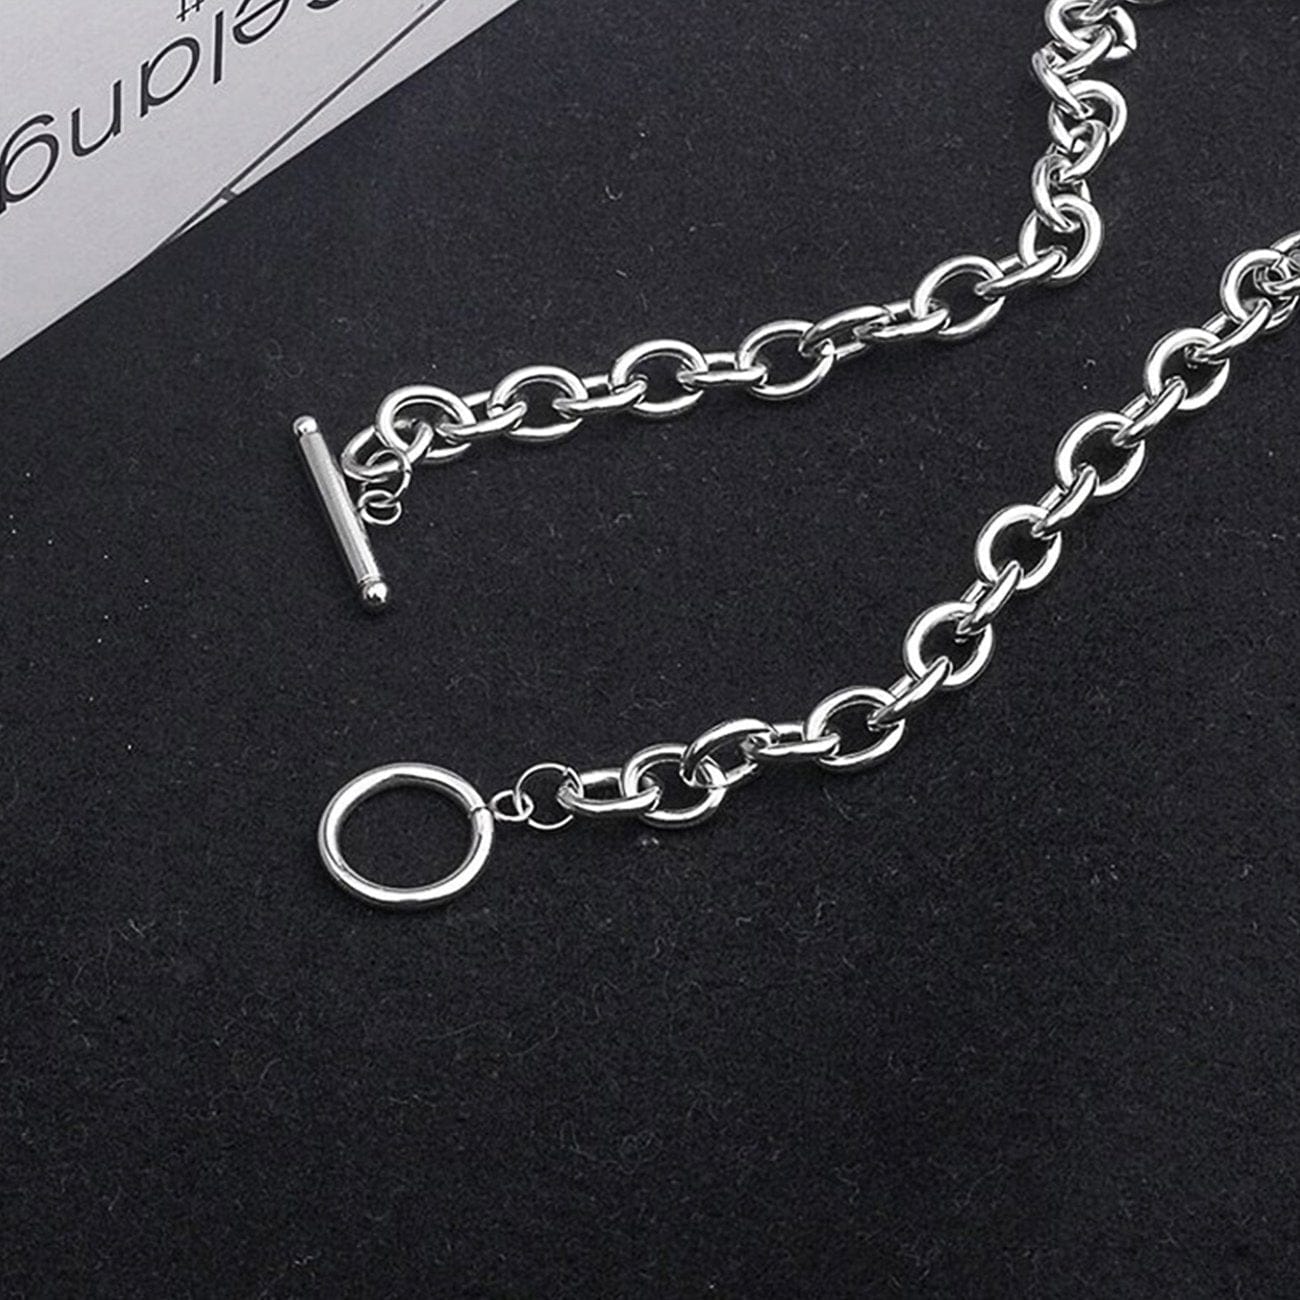 Punk Thick Chain Hollow OT Buckle Necklace Streetwear Brand Techwear Combat Tactical YUGEN THEORY